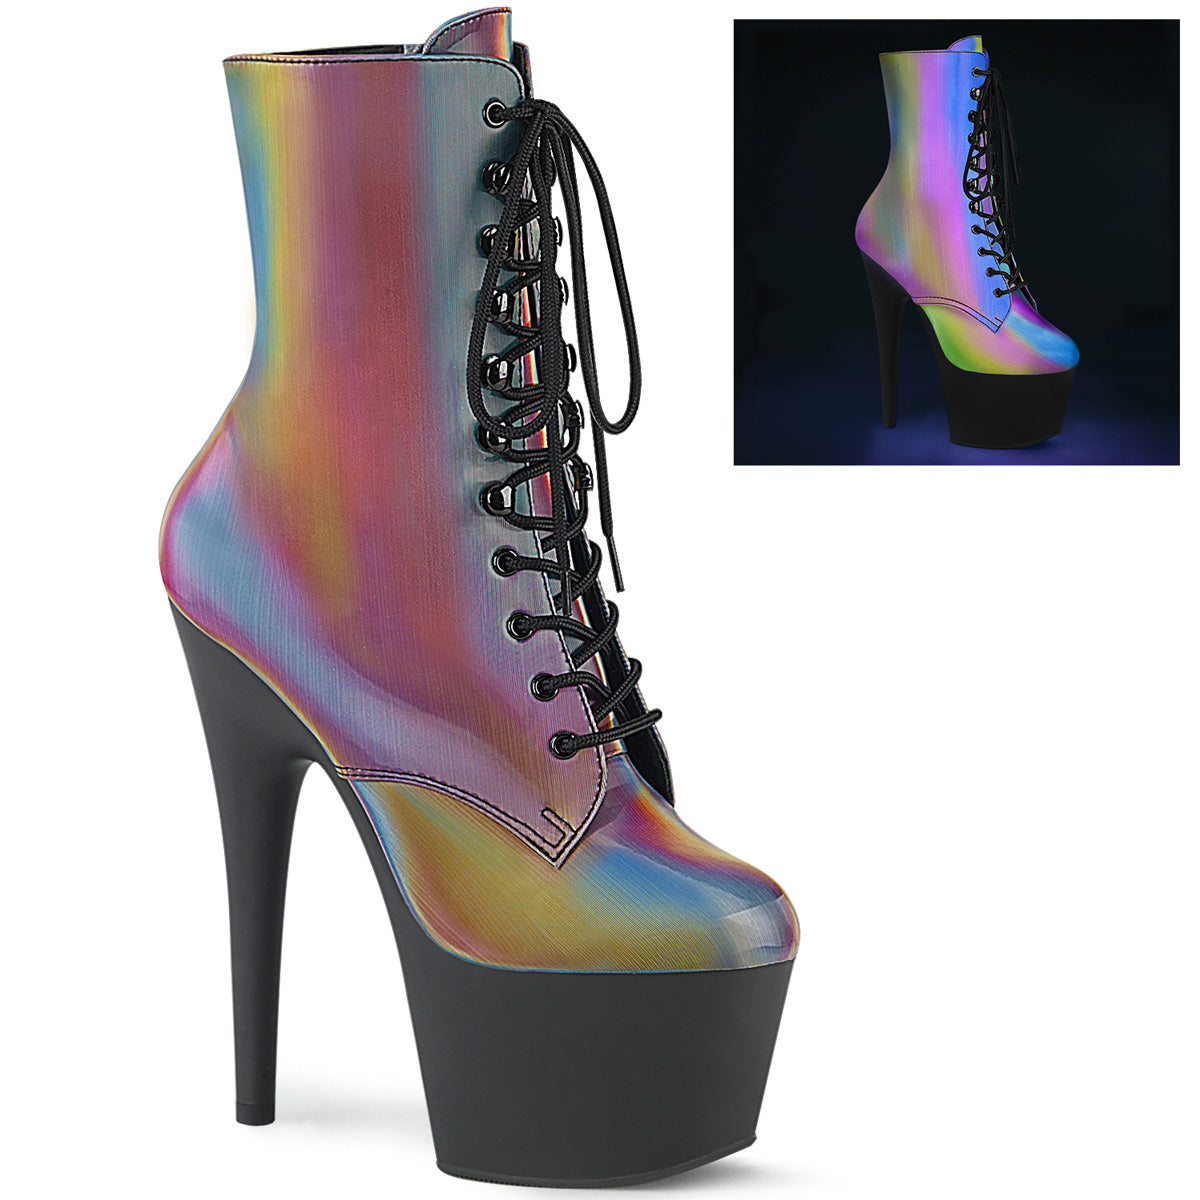 Pleaser ADORE-1020REFL Rainbow Reflective-Black Matte 7 Inch (178mm) Heel, 2 3/4 Inch (70mm) Platform Lace-Up Front Ankle Boot With Rainbow Reflective Effect Upper, Inside Zip Closure